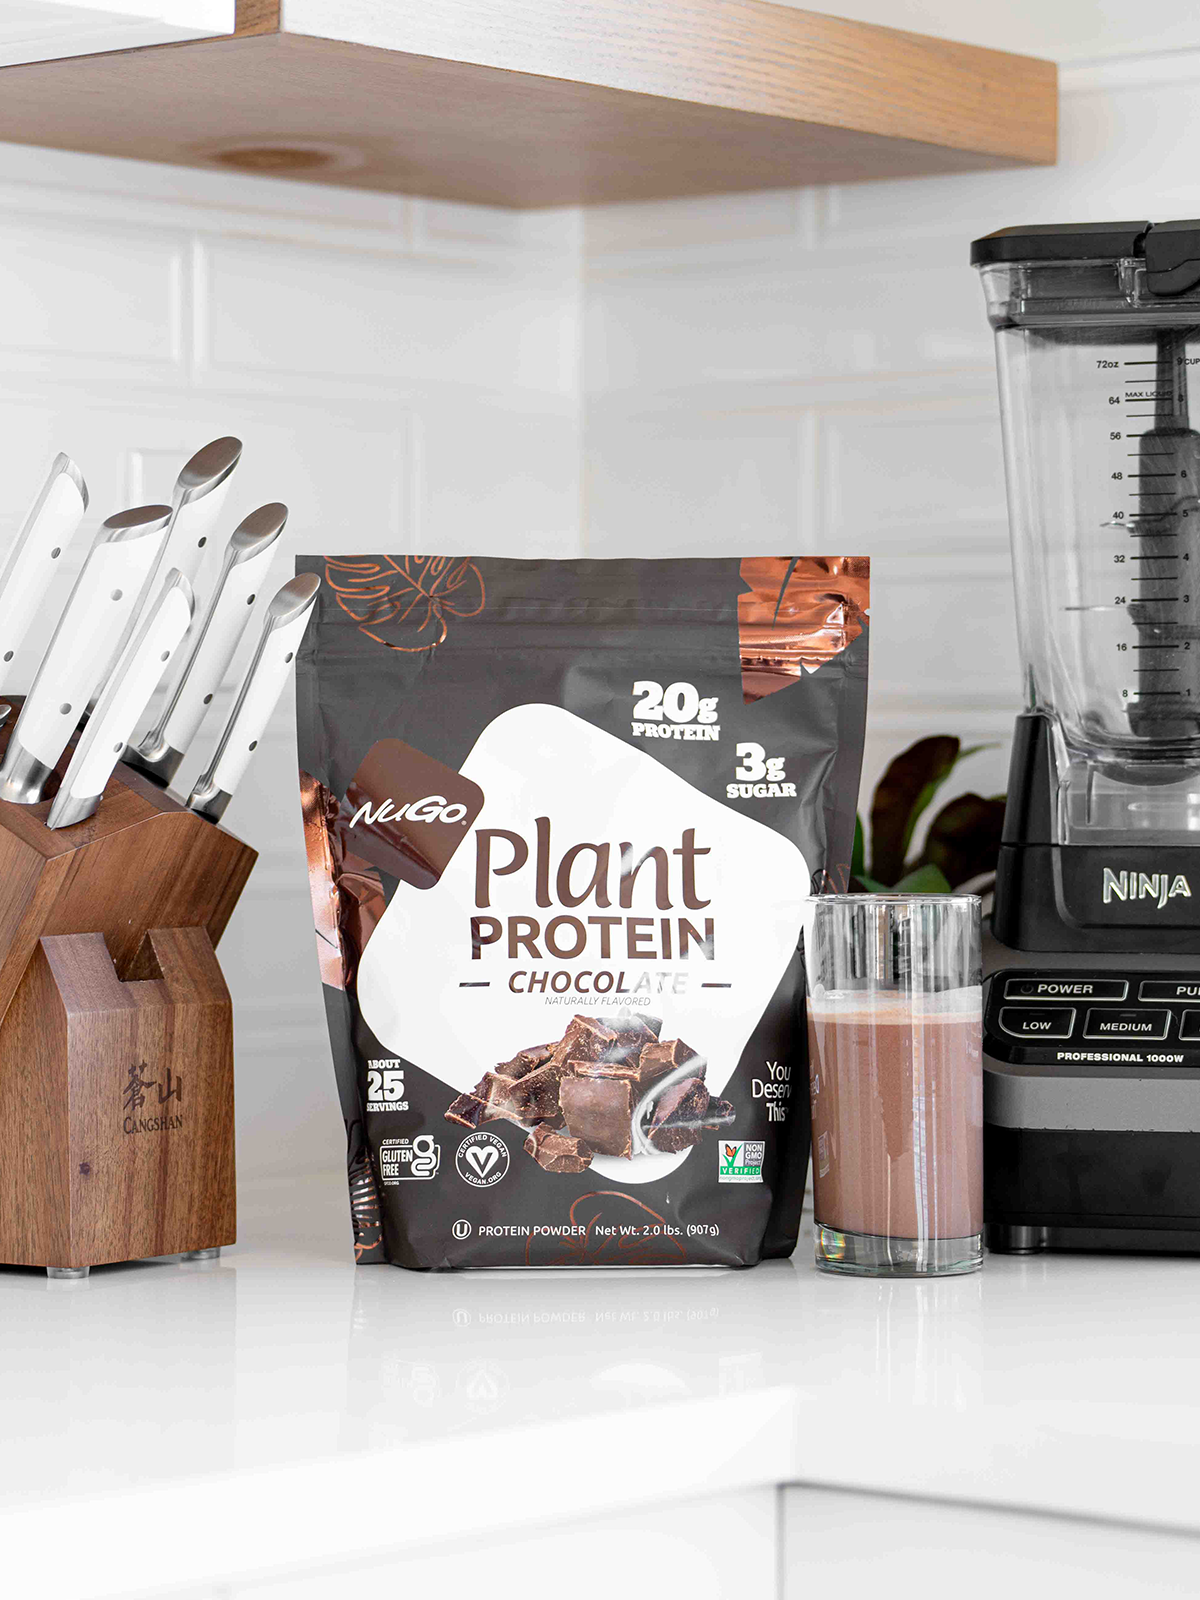 Bag of NUGo Protein Powder between a blender and a knife block